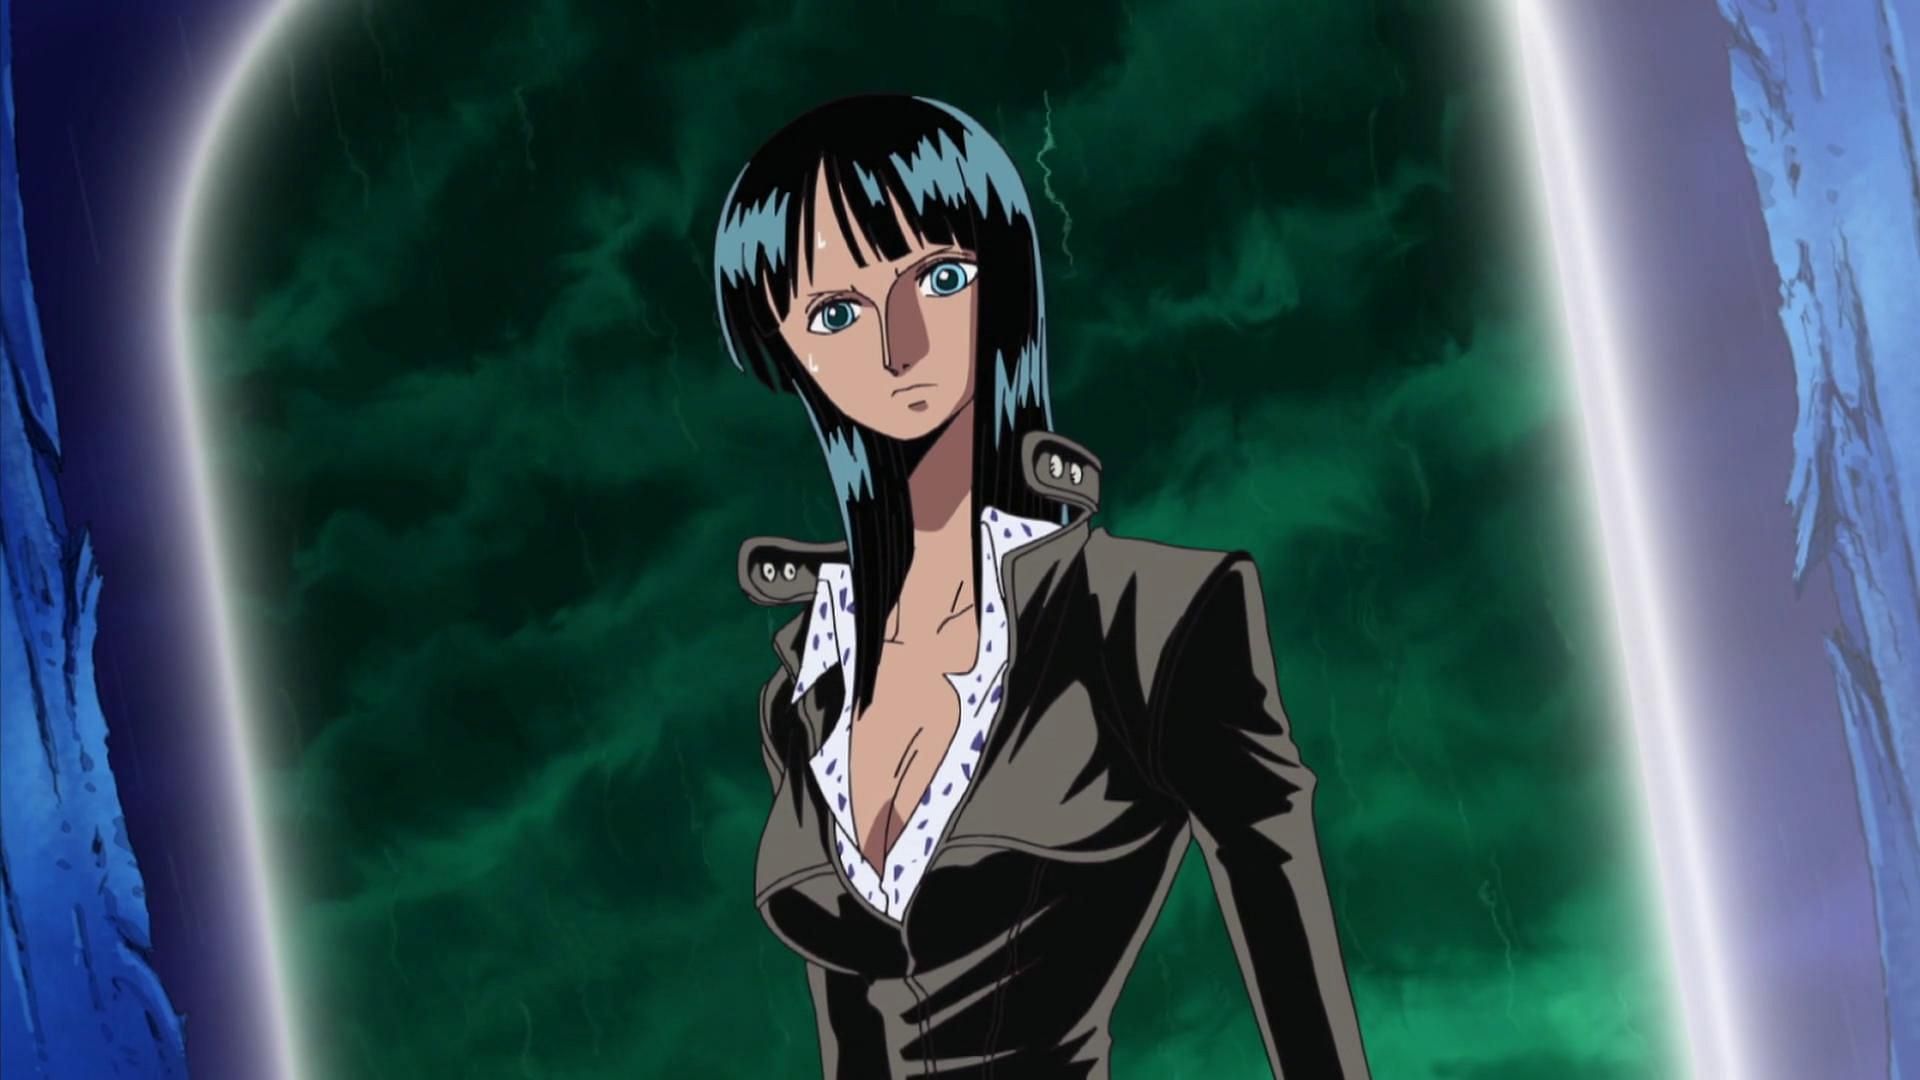 Nico Robin in her Enies Lobby outfit (Image via Toei Animation, One Piece)